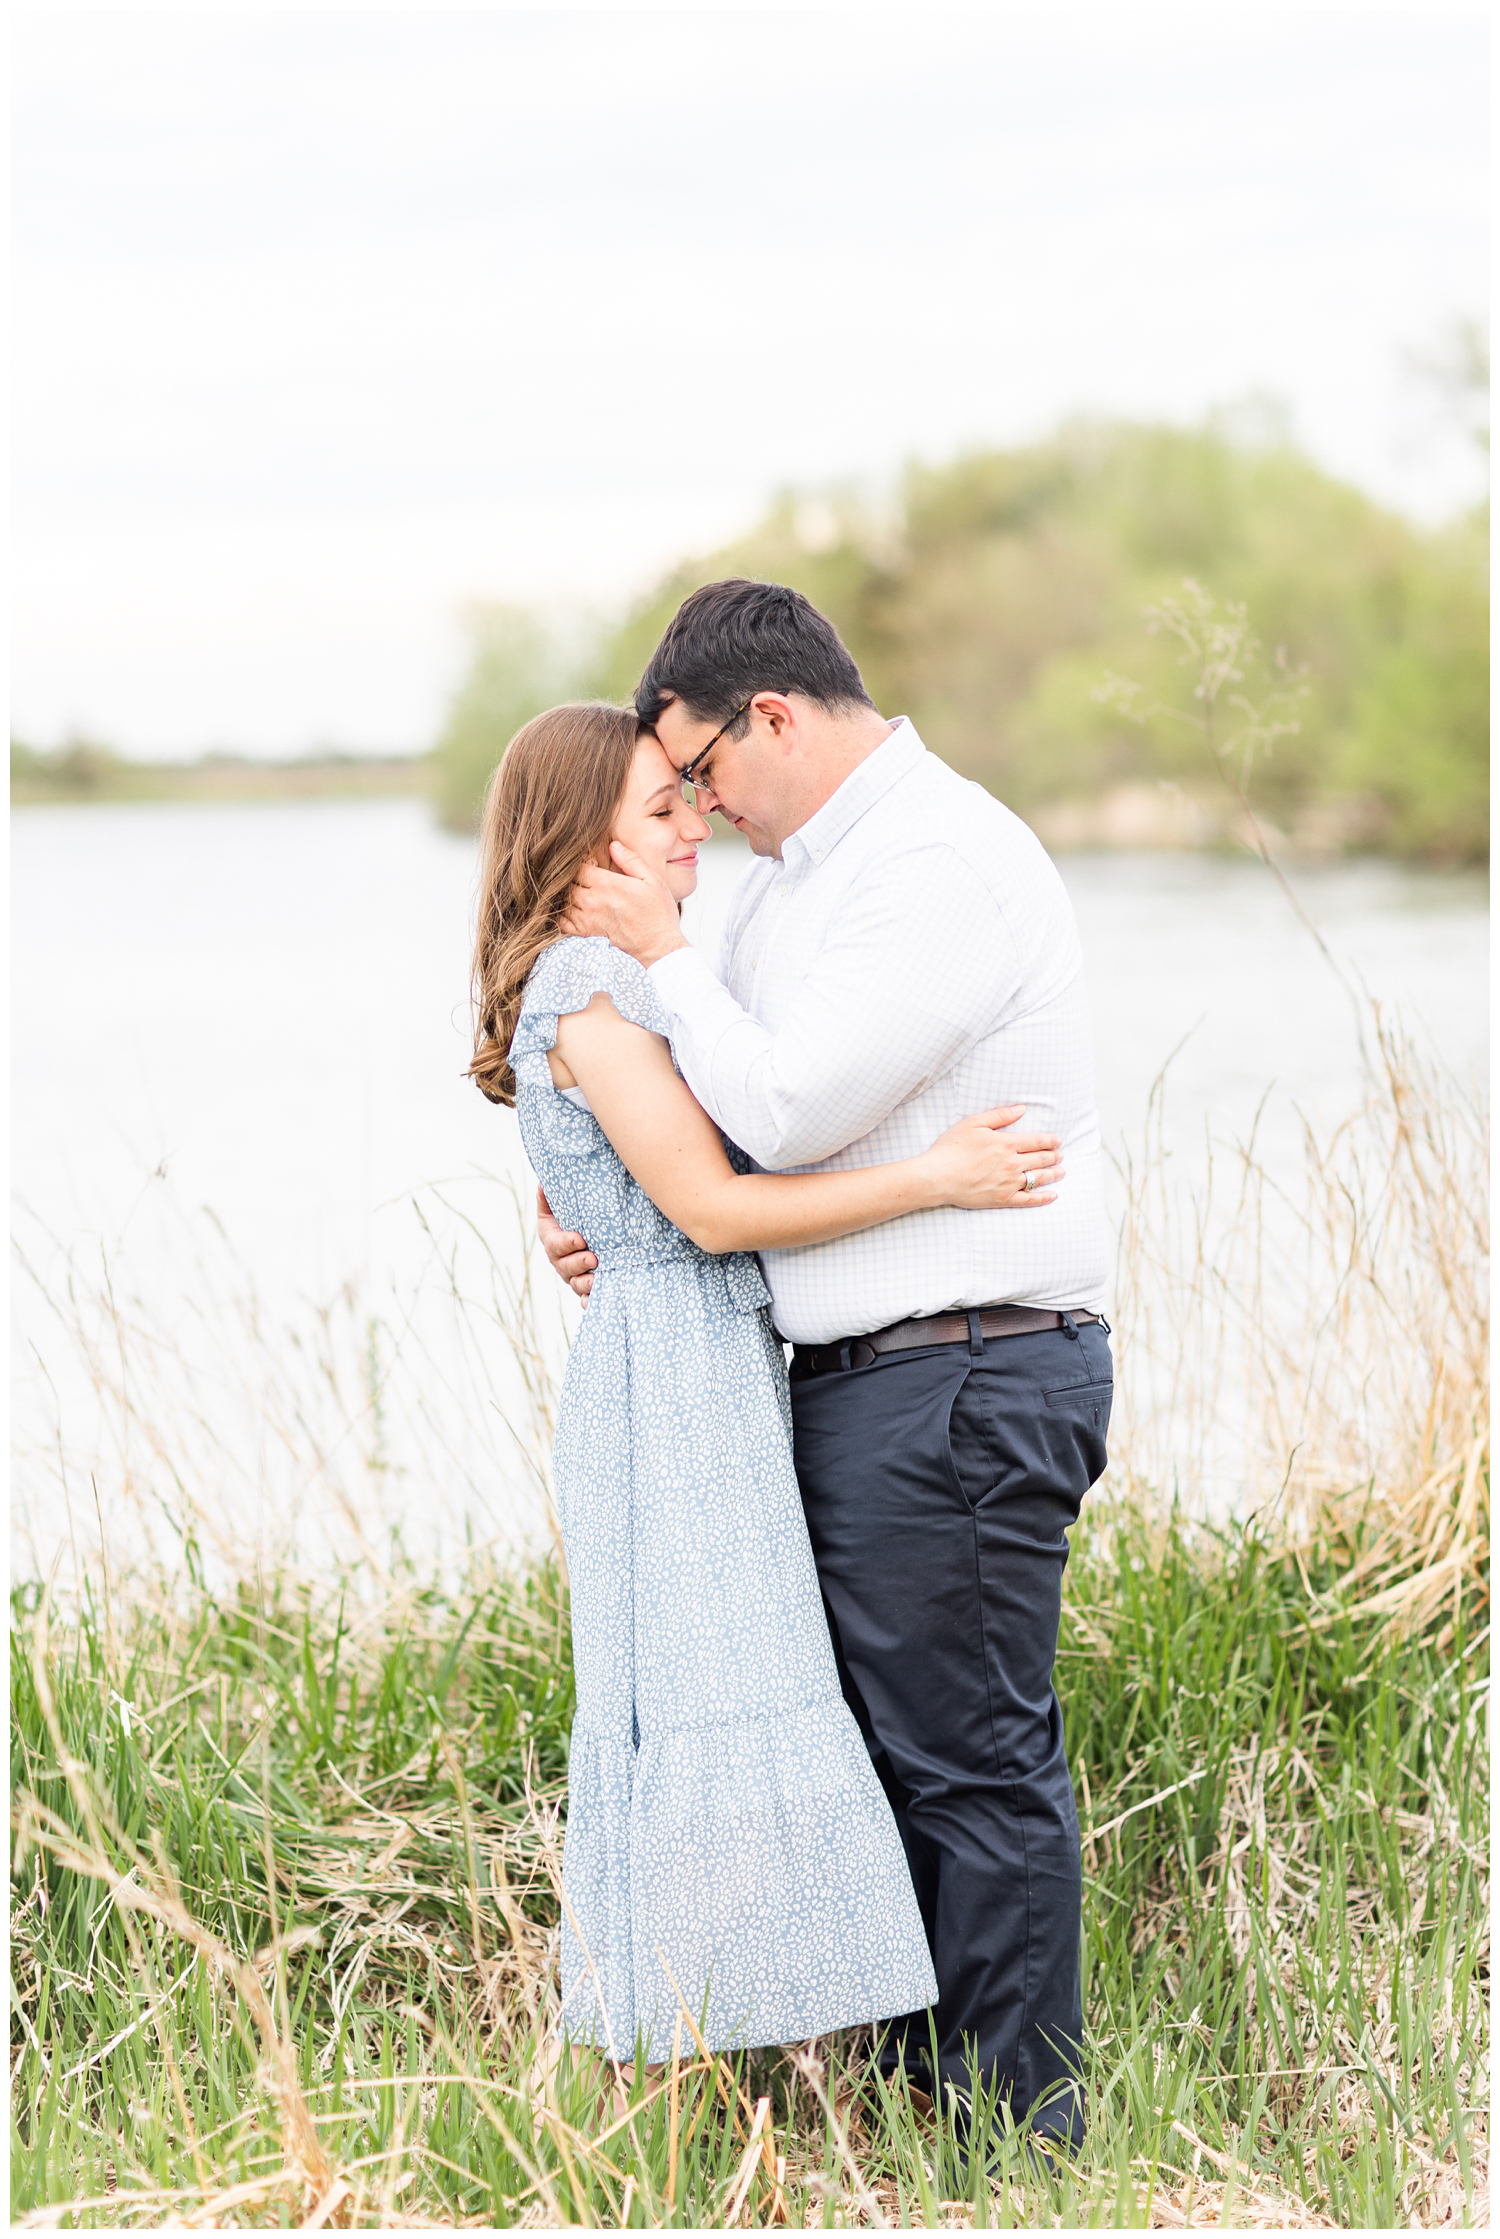 Joe and Leslie embrace with Smith Lake in the background | CB Studio